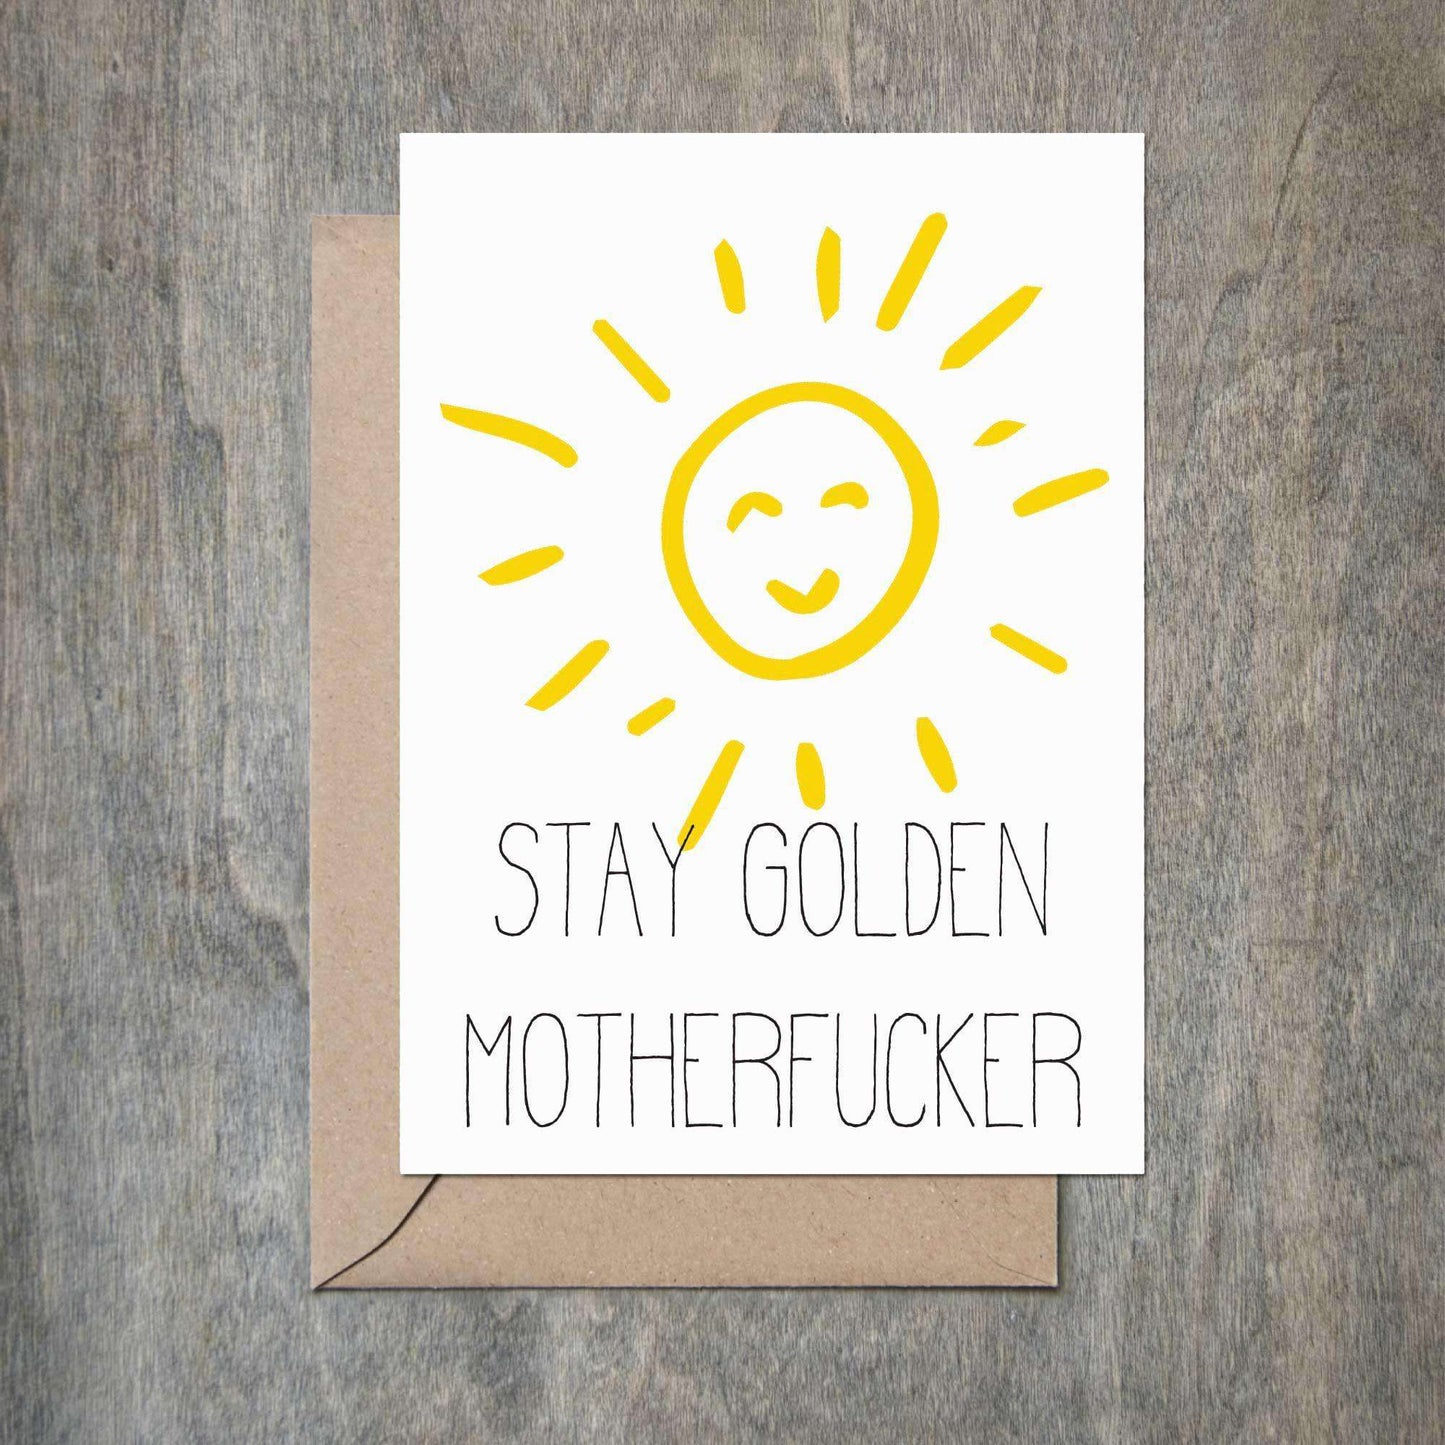 Load image into Gallery viewer, Stay Golden Motherfucker Funny Friendship Card-Friendship Cards-Crimson and Clover Studio
